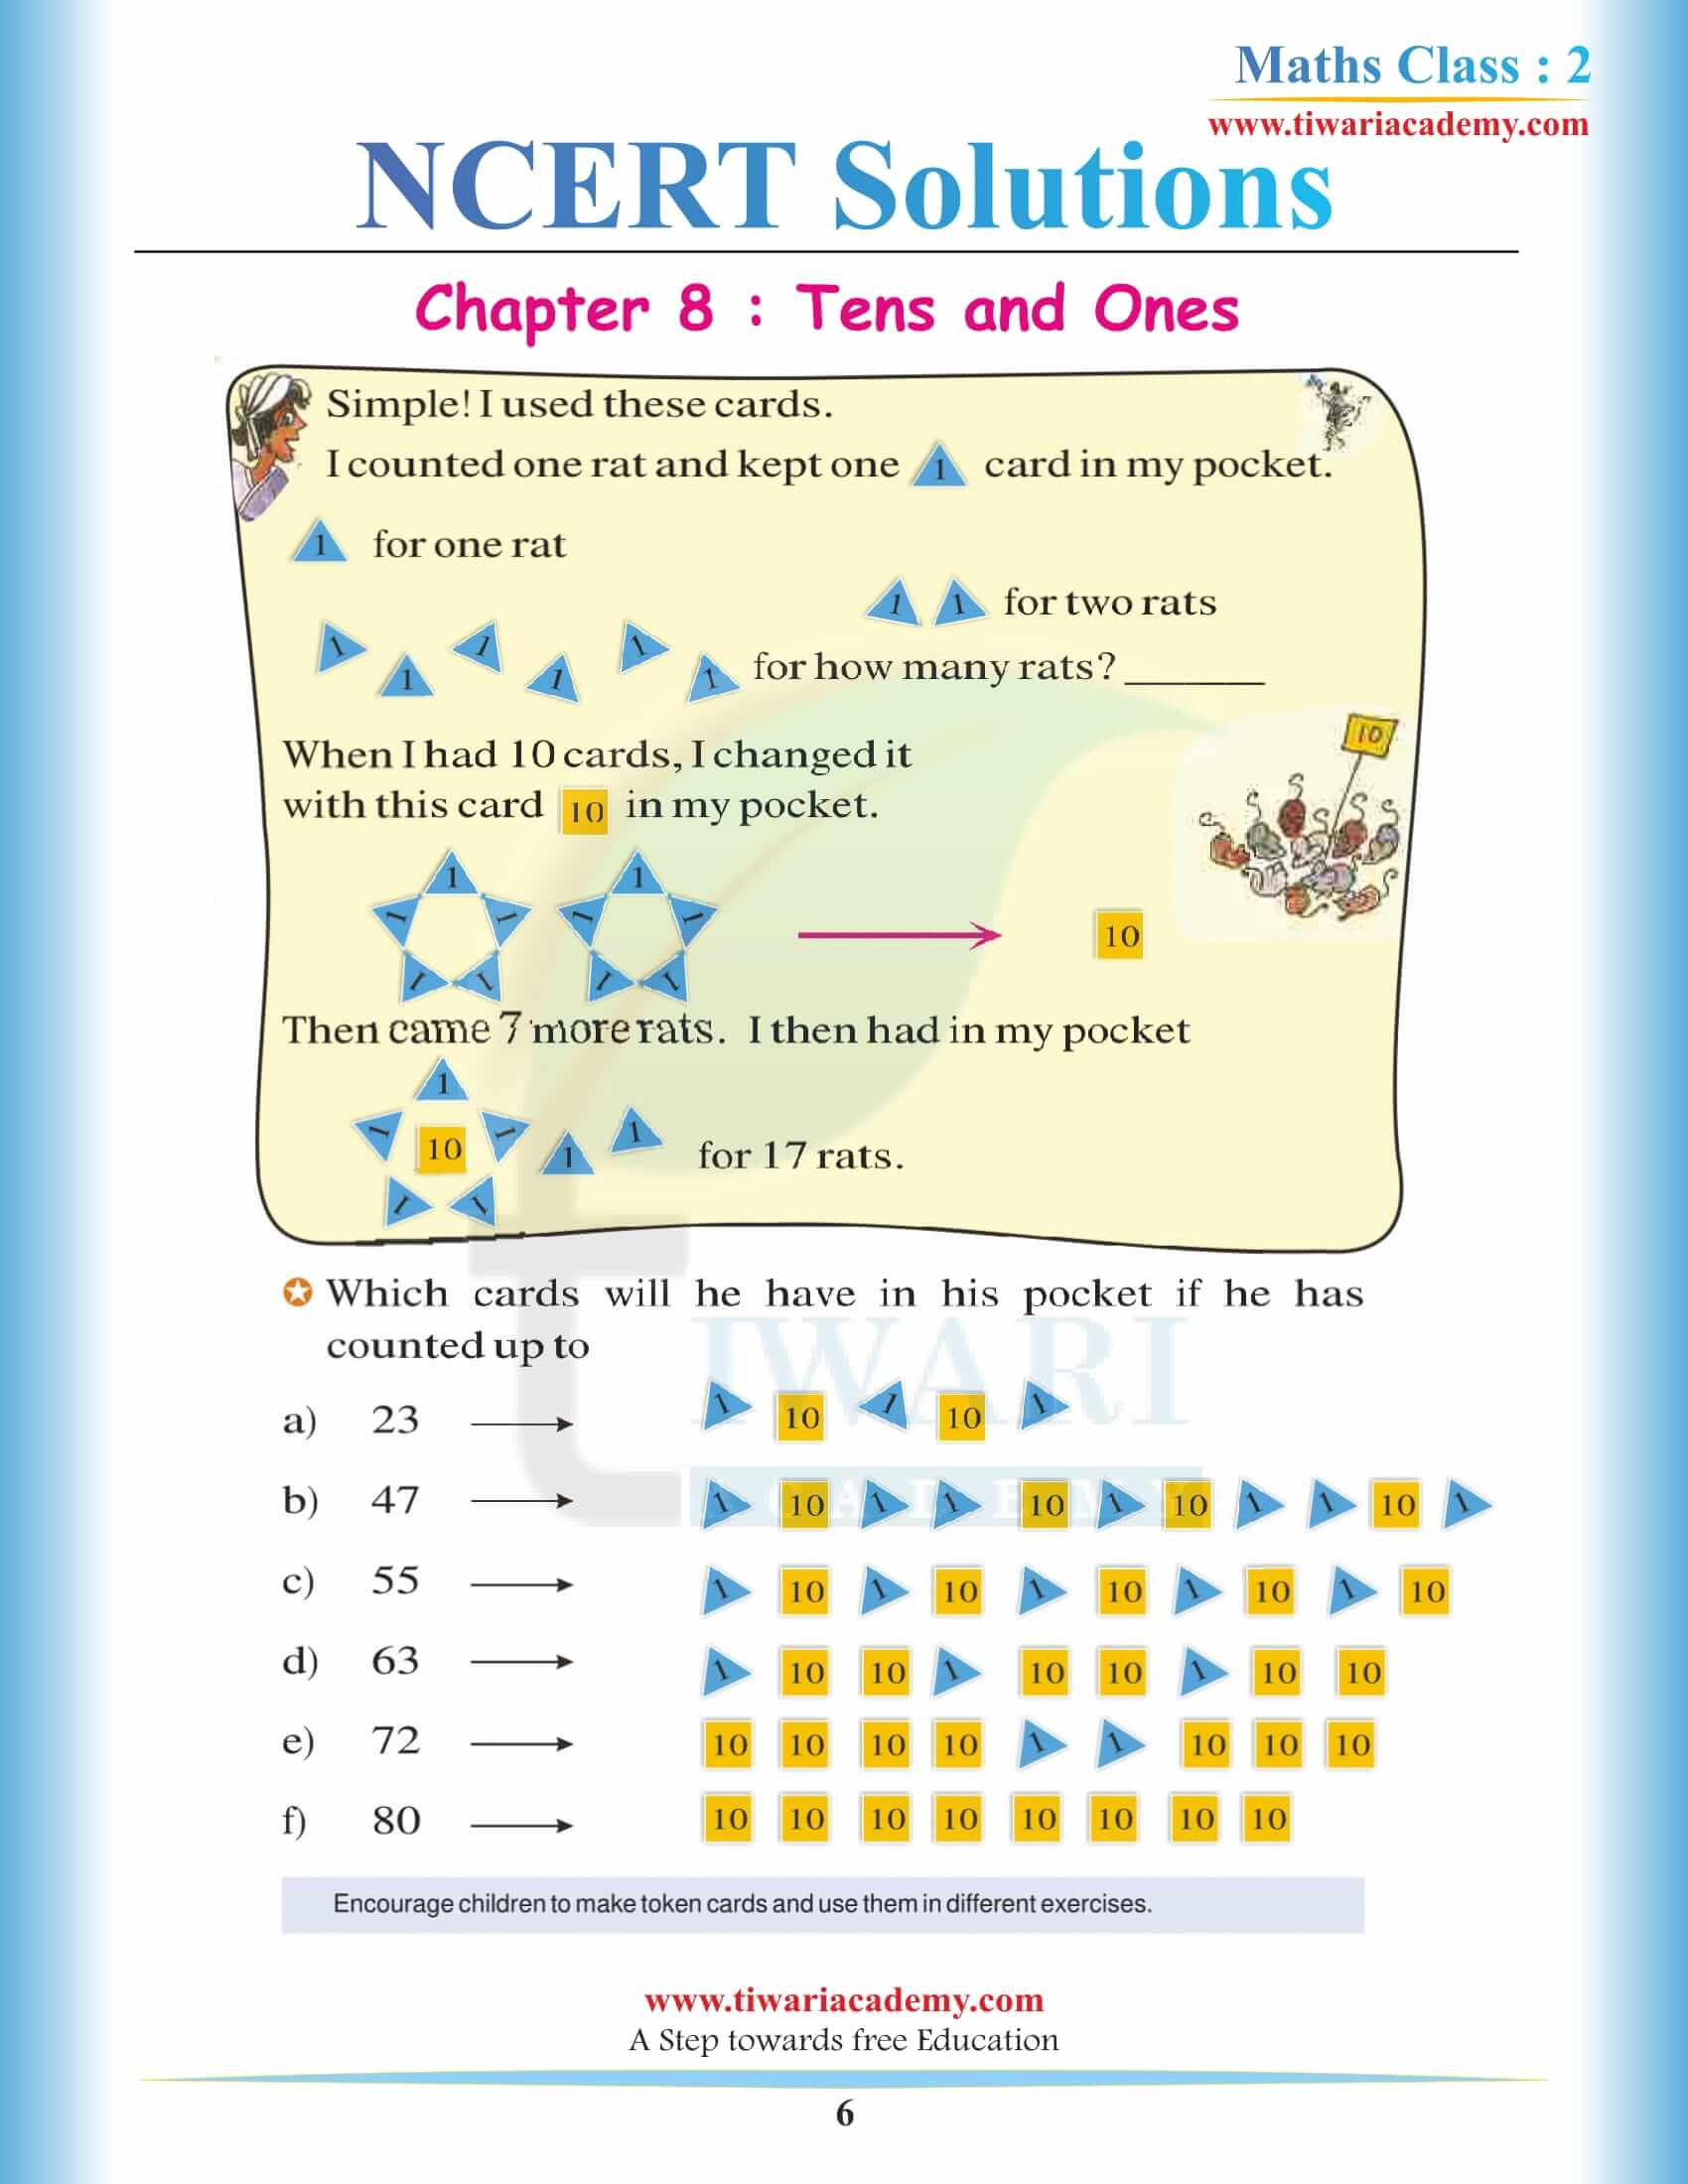 NCERT Solutions for Class 2 Maths Chapter 8 in PDF file